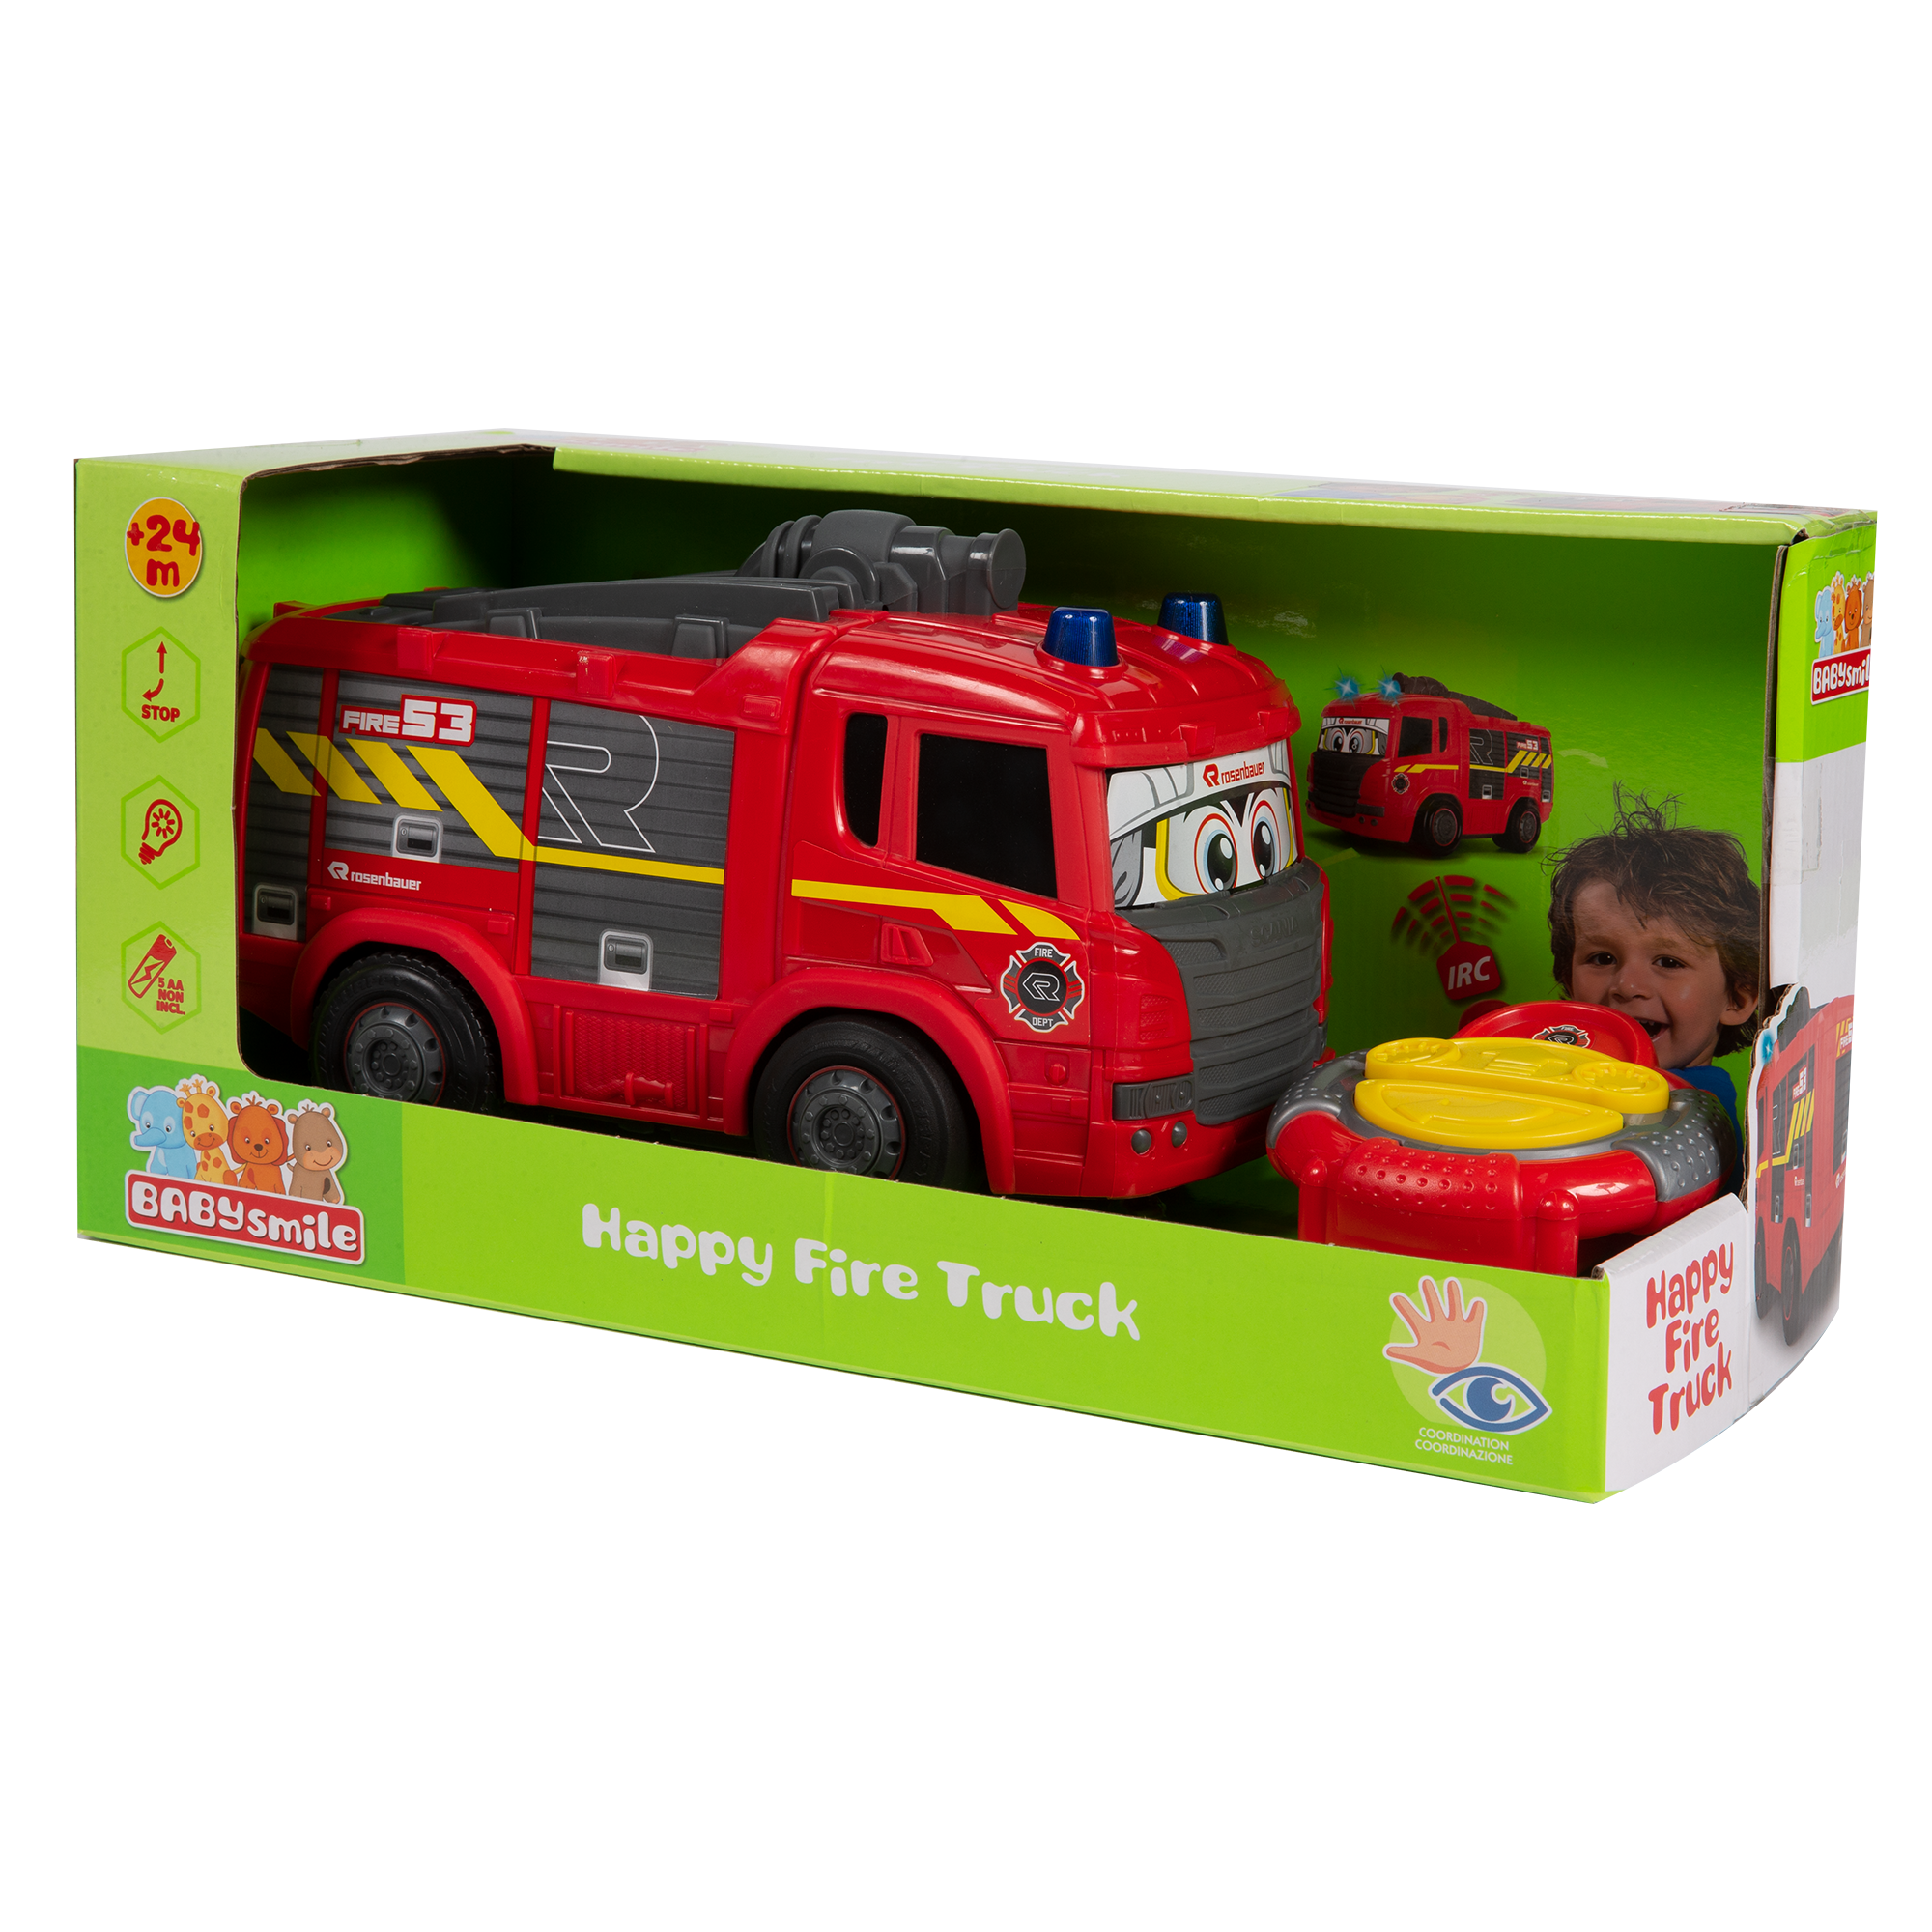 Happy fire truck - BABY SMILE